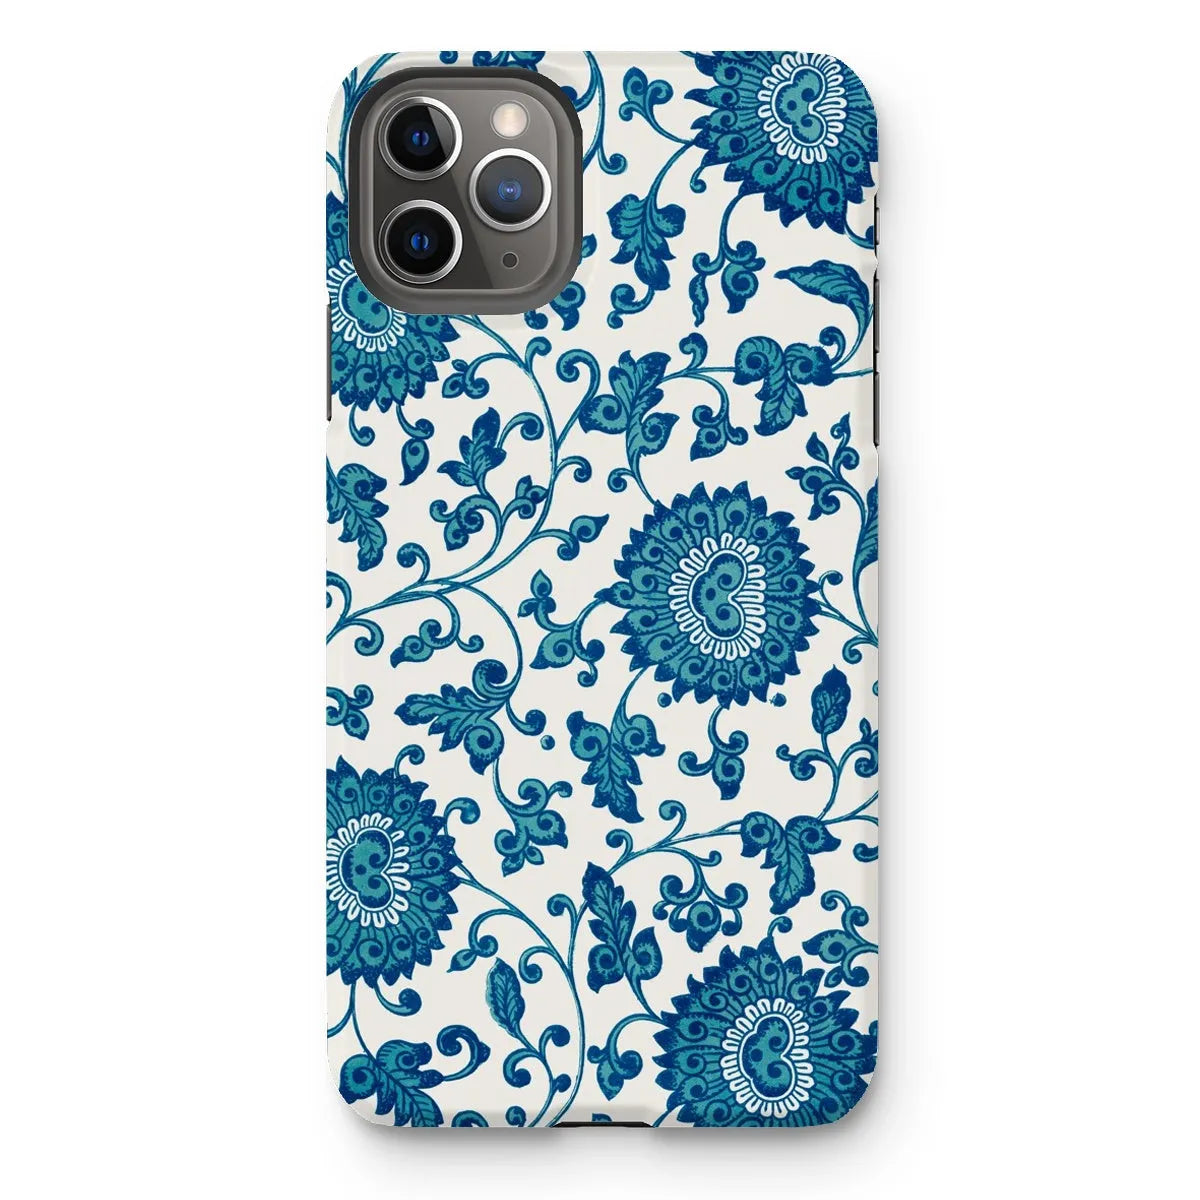 Blue And White Floral Aesthetic Art Phone Case - Owen Jones - Iphone 11 Pro Max / Matte - Mobile Phone Cases